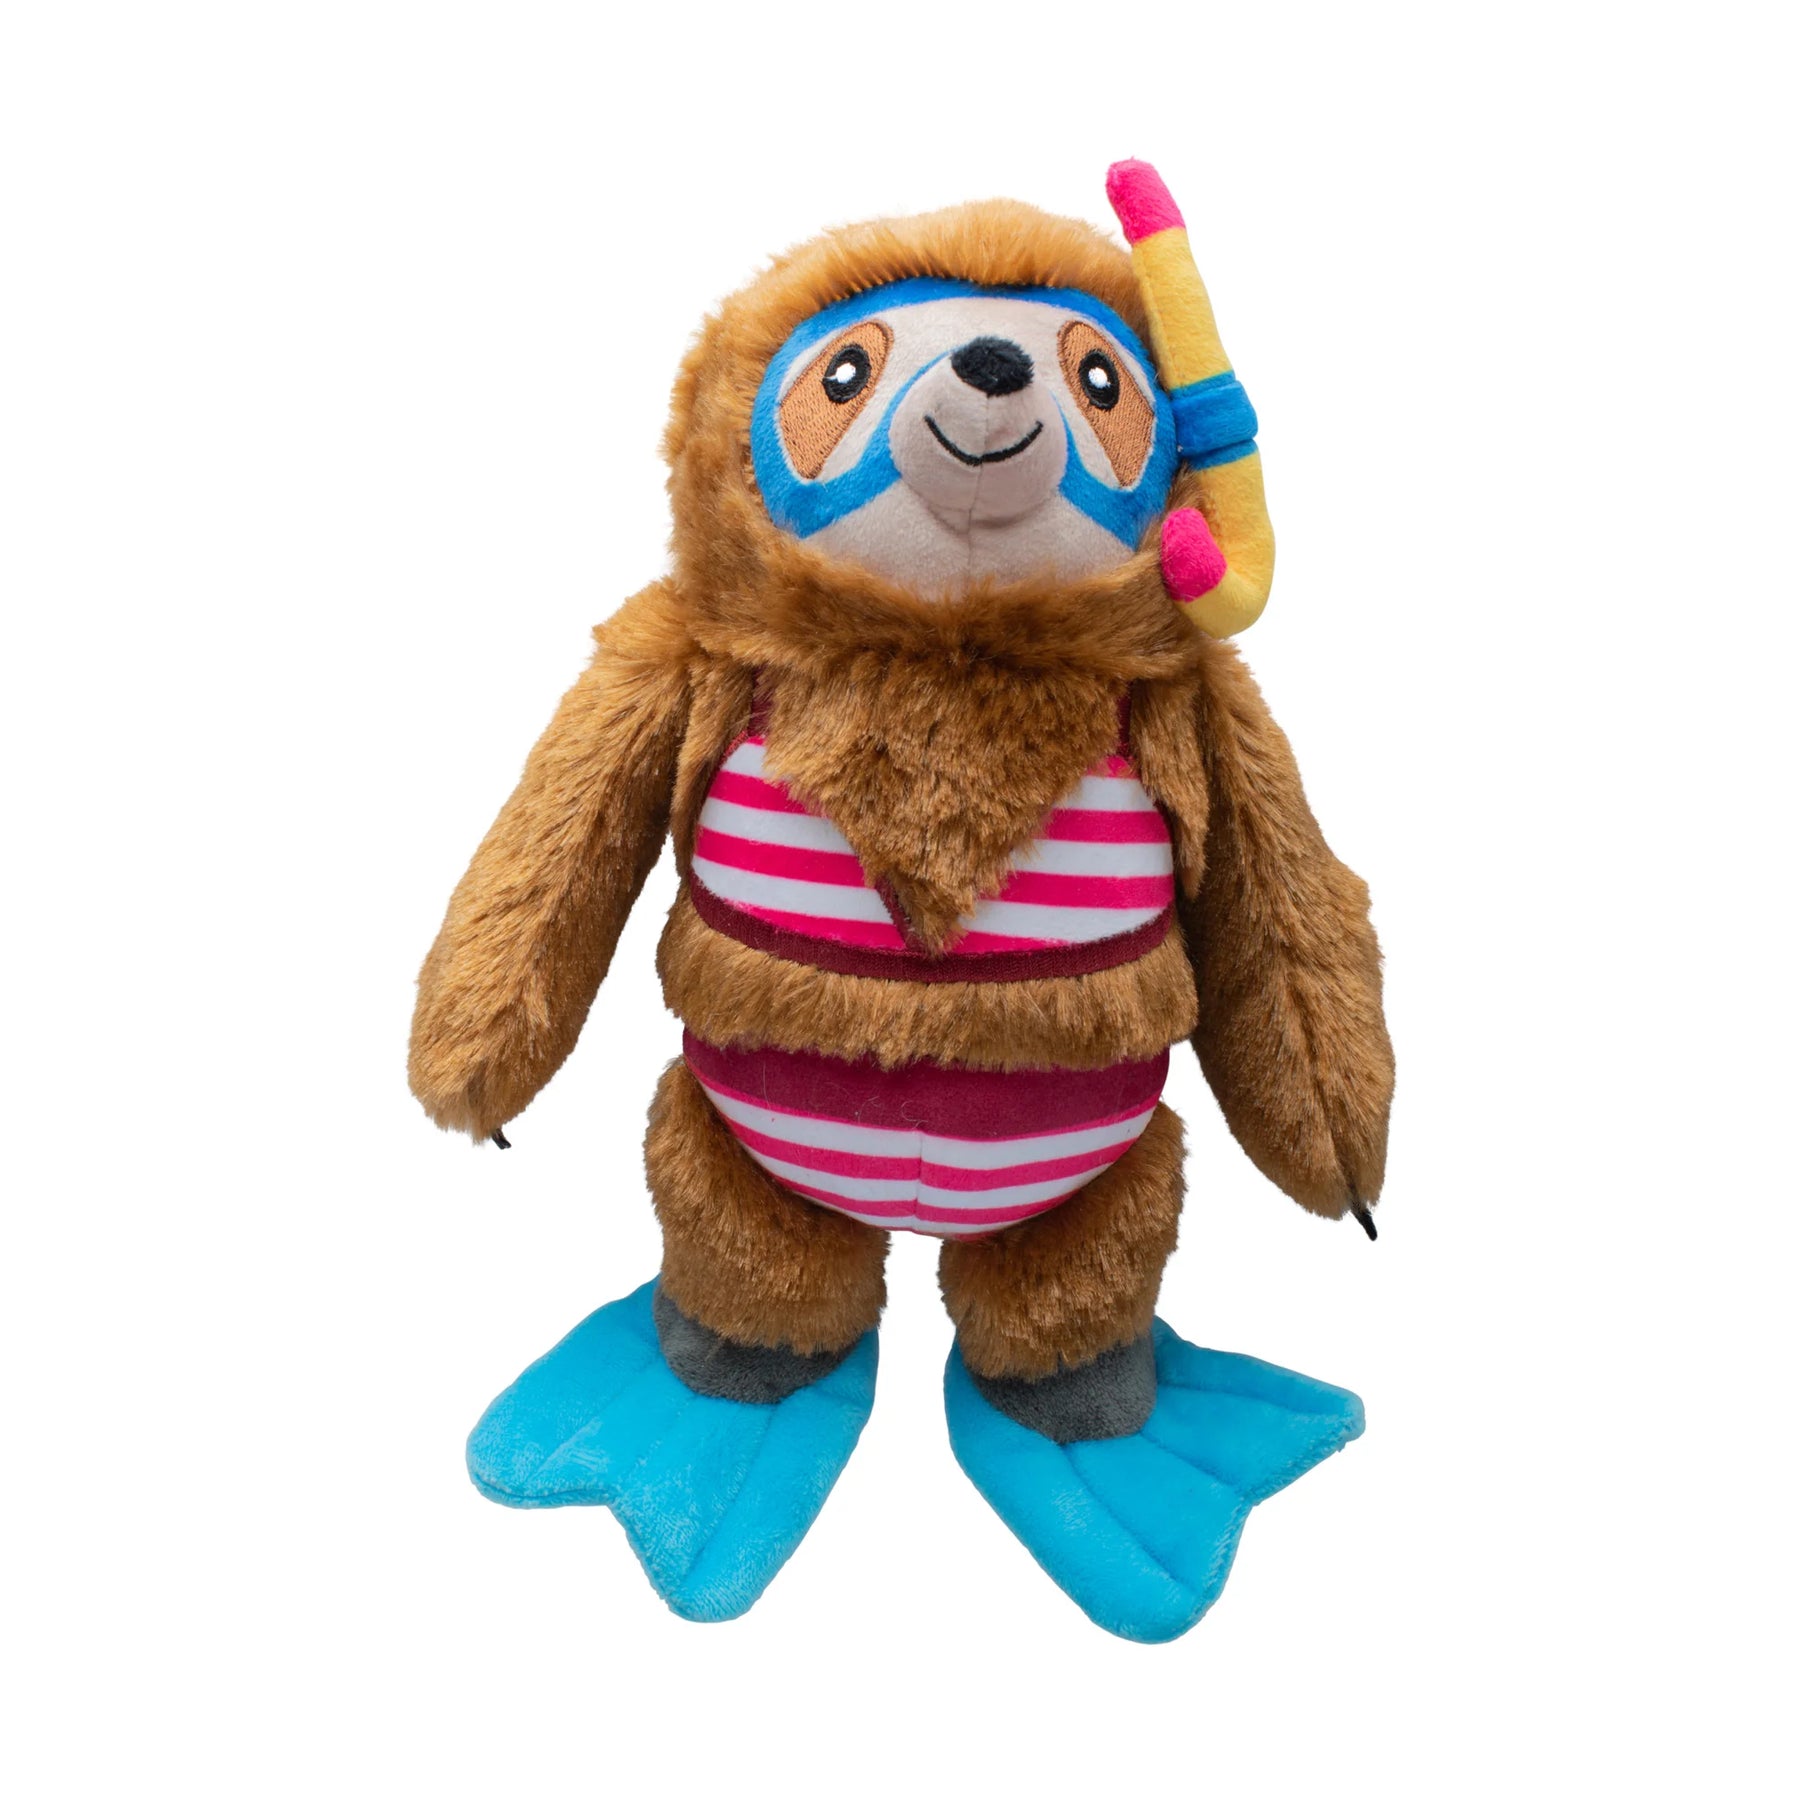 Petshop by Fringe Studio - Dog Toy Swimmin' with the Fish